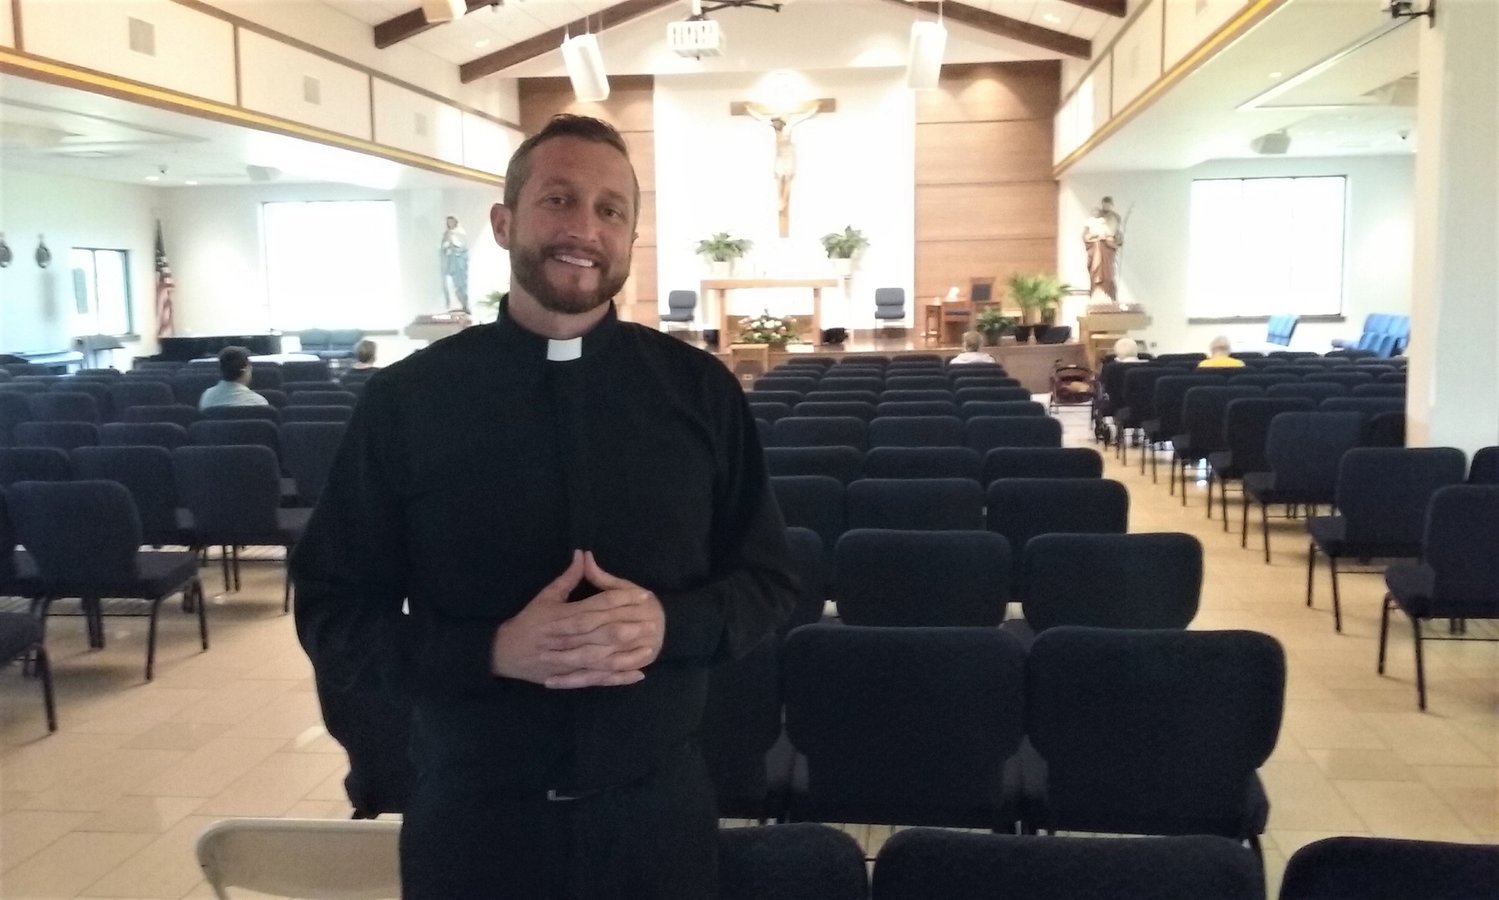 Fr. Richard Pagano will be installed as the inaugural pastor of St. John Paul II Catholic Church in Nocatee as the mission officially becomes a parish.